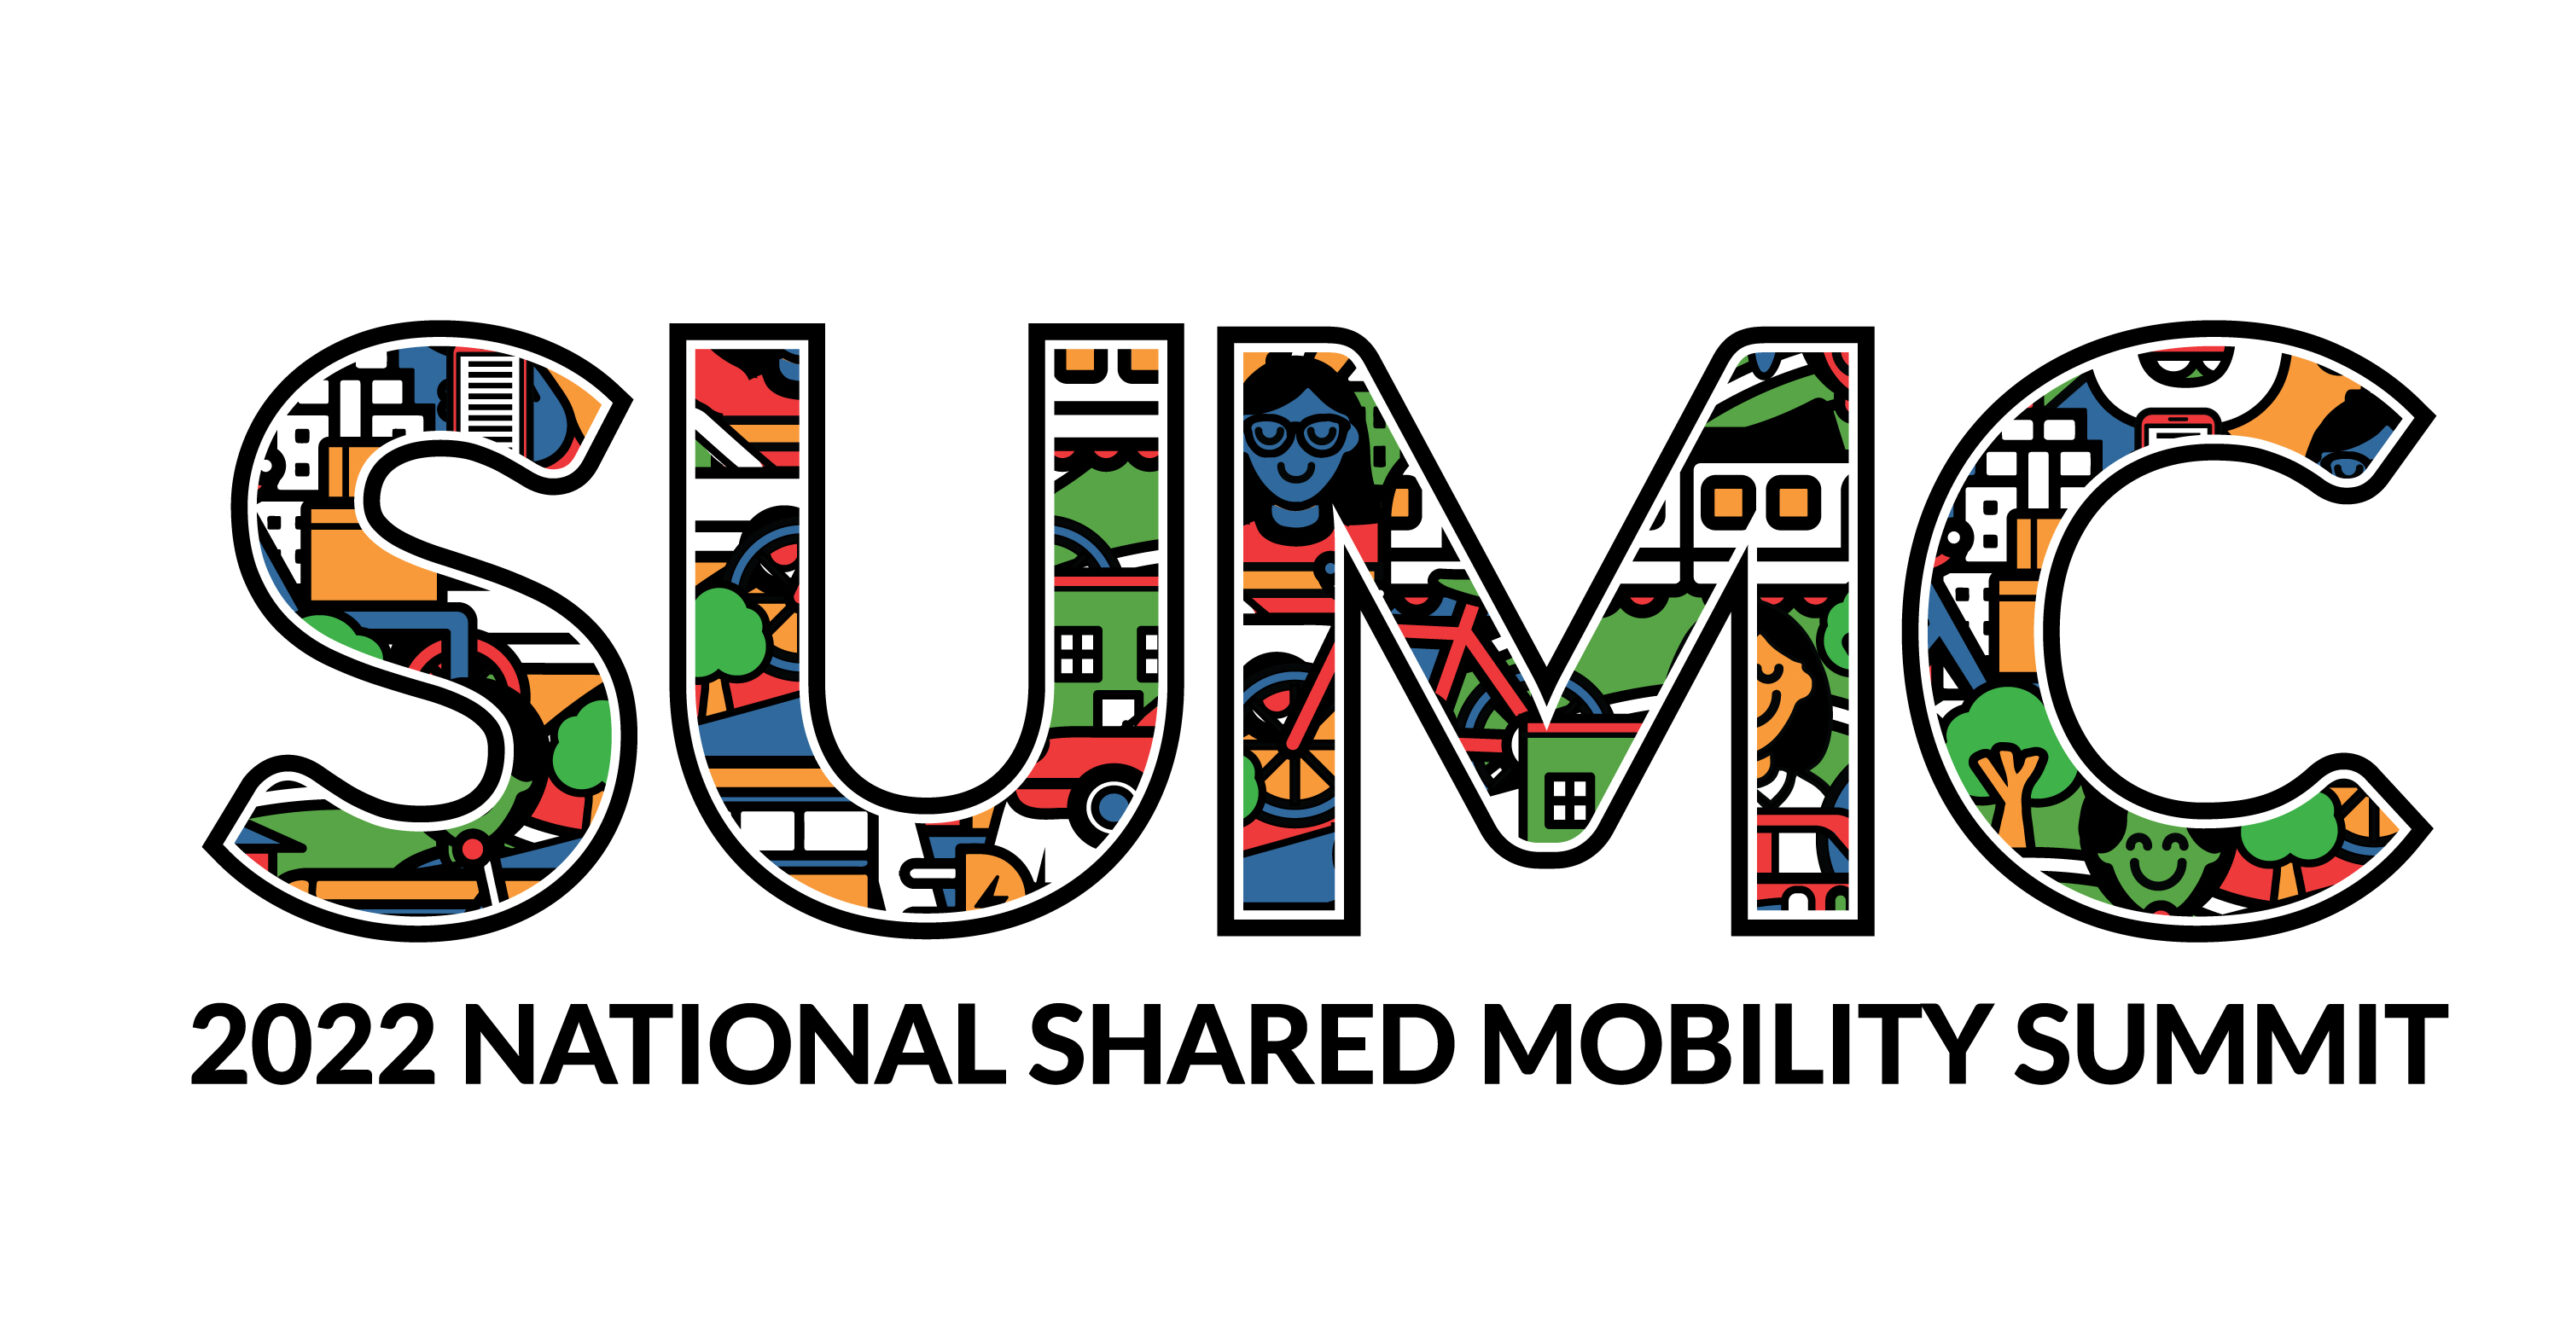 Mobility Hub + News about board-member Tiffany Chu, our Summit, & projects coast to coast